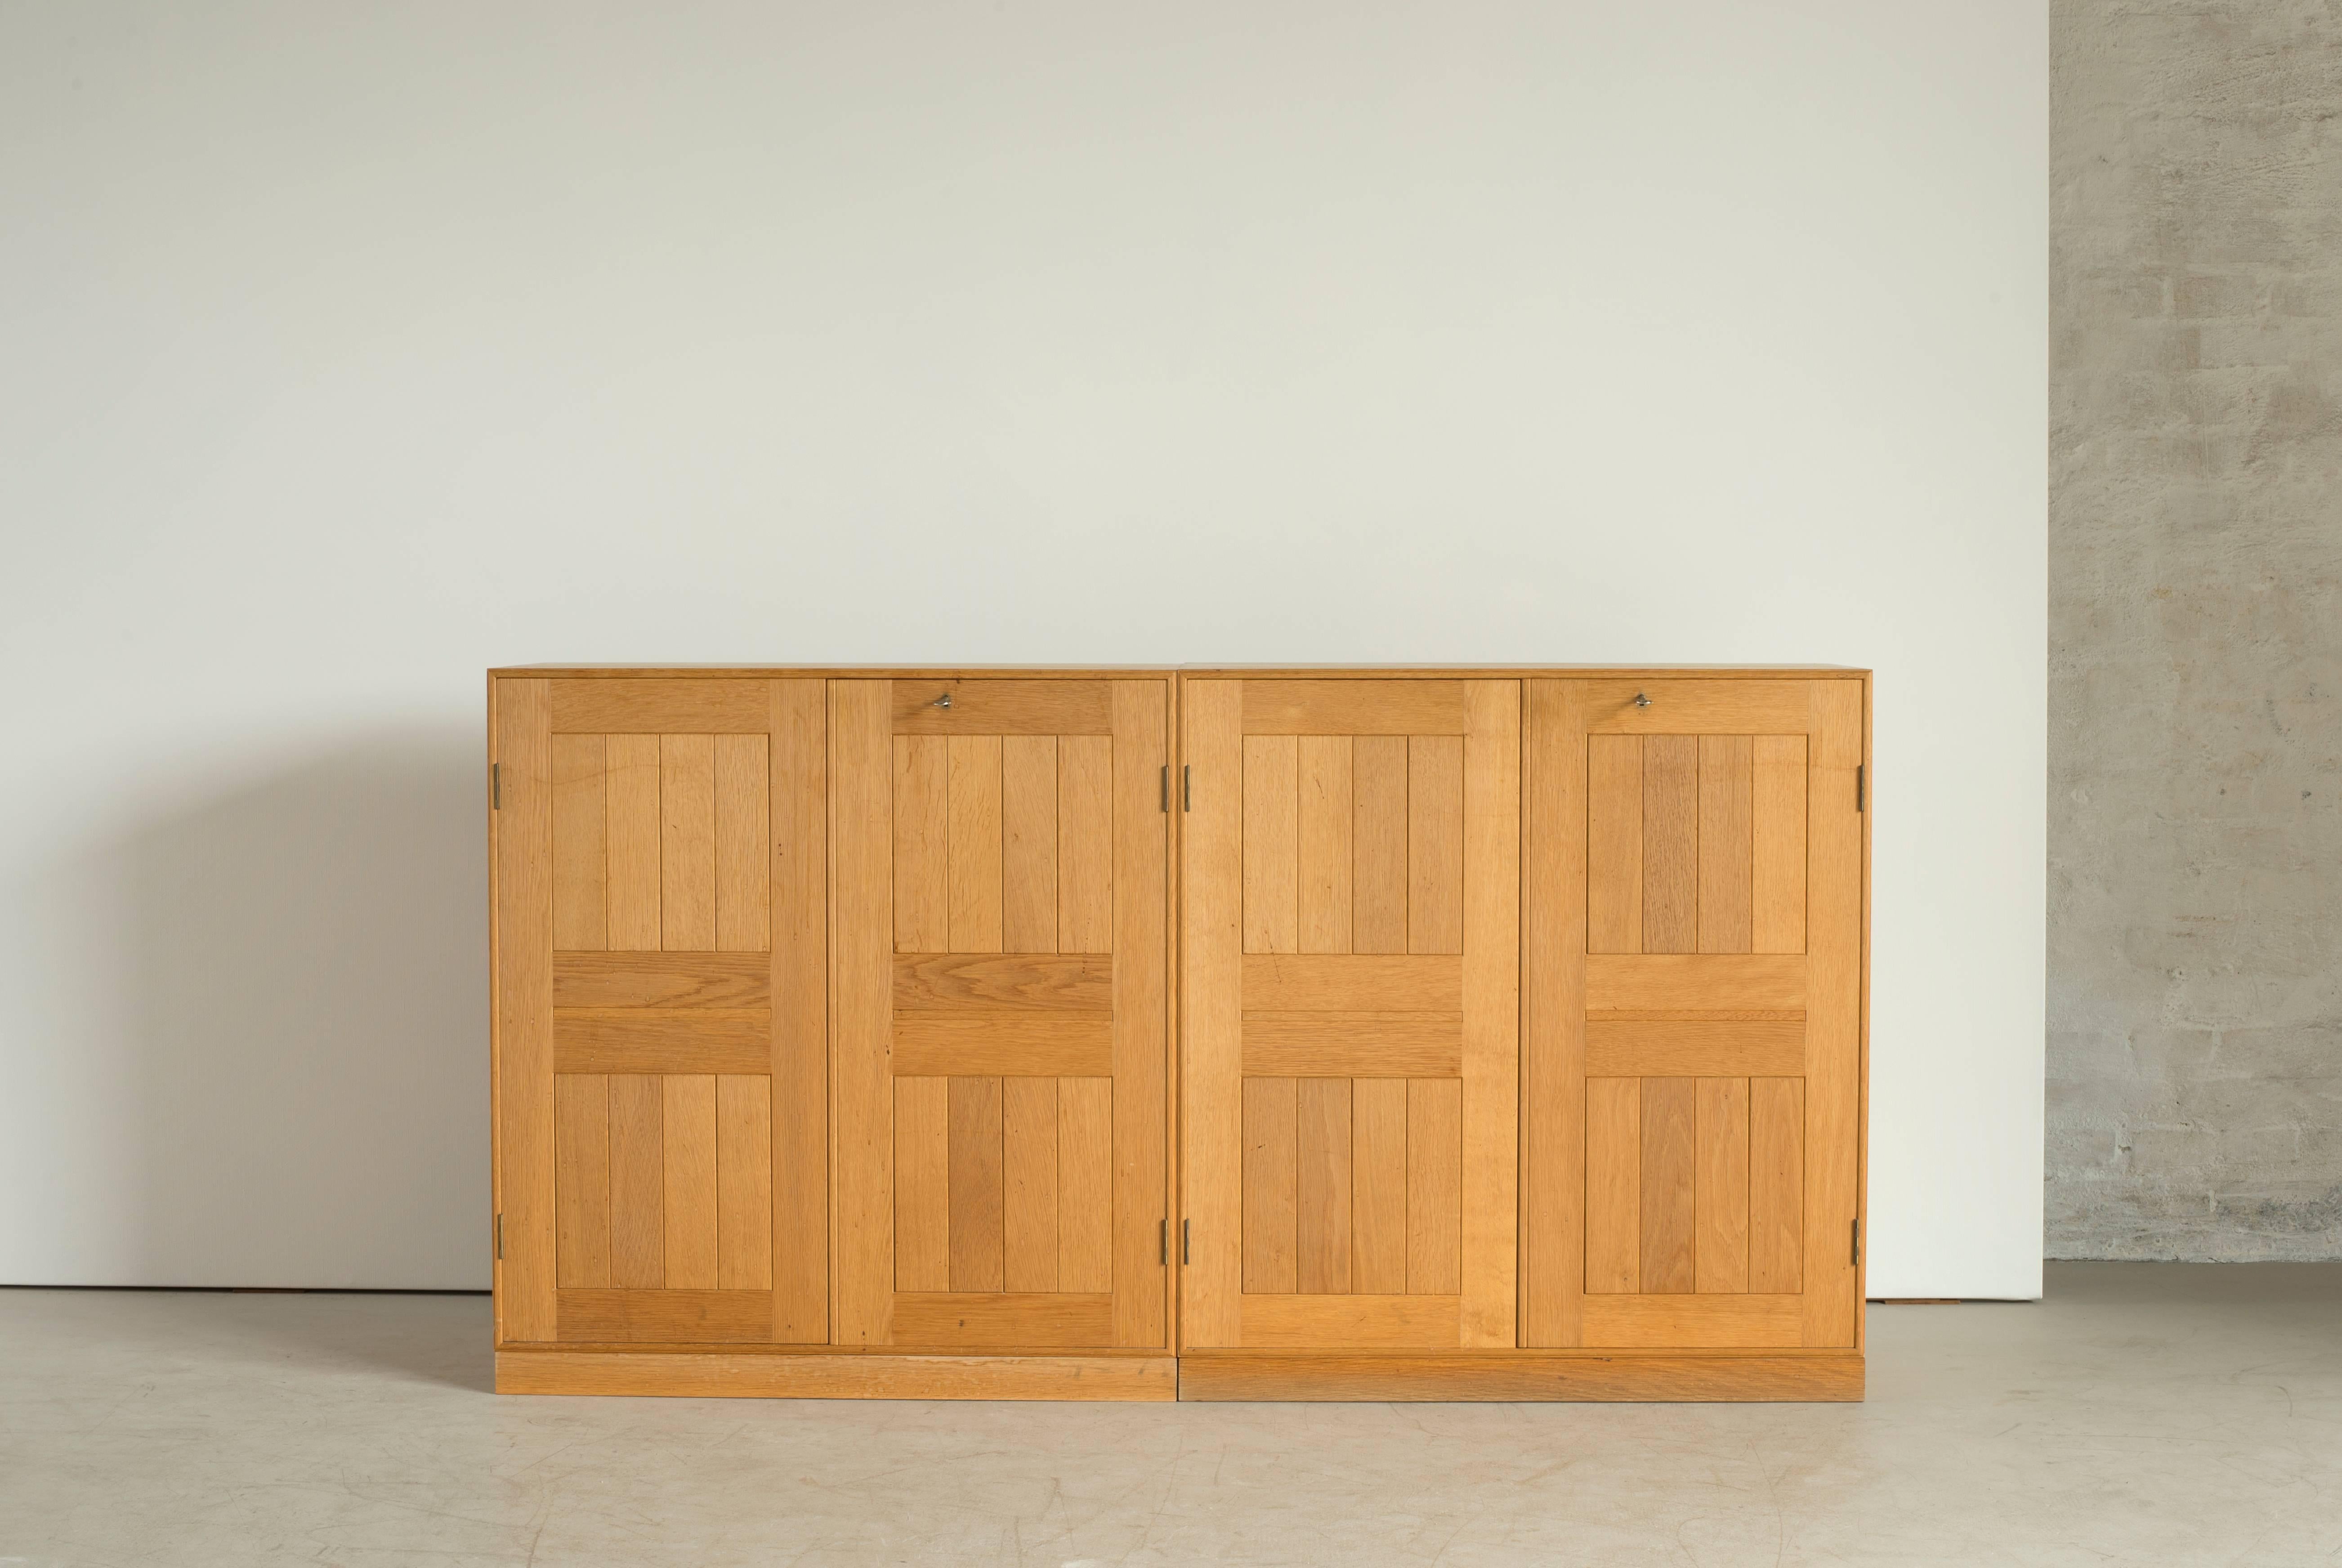 Mogens Koch cabinets and bookcases in oak and maple. Executed by Rud. Rasmussen.

Reverse with paper labels ‘RUD. RASMUSSENS/SNEDKERIER/KØBENHAVN/DENMARK.